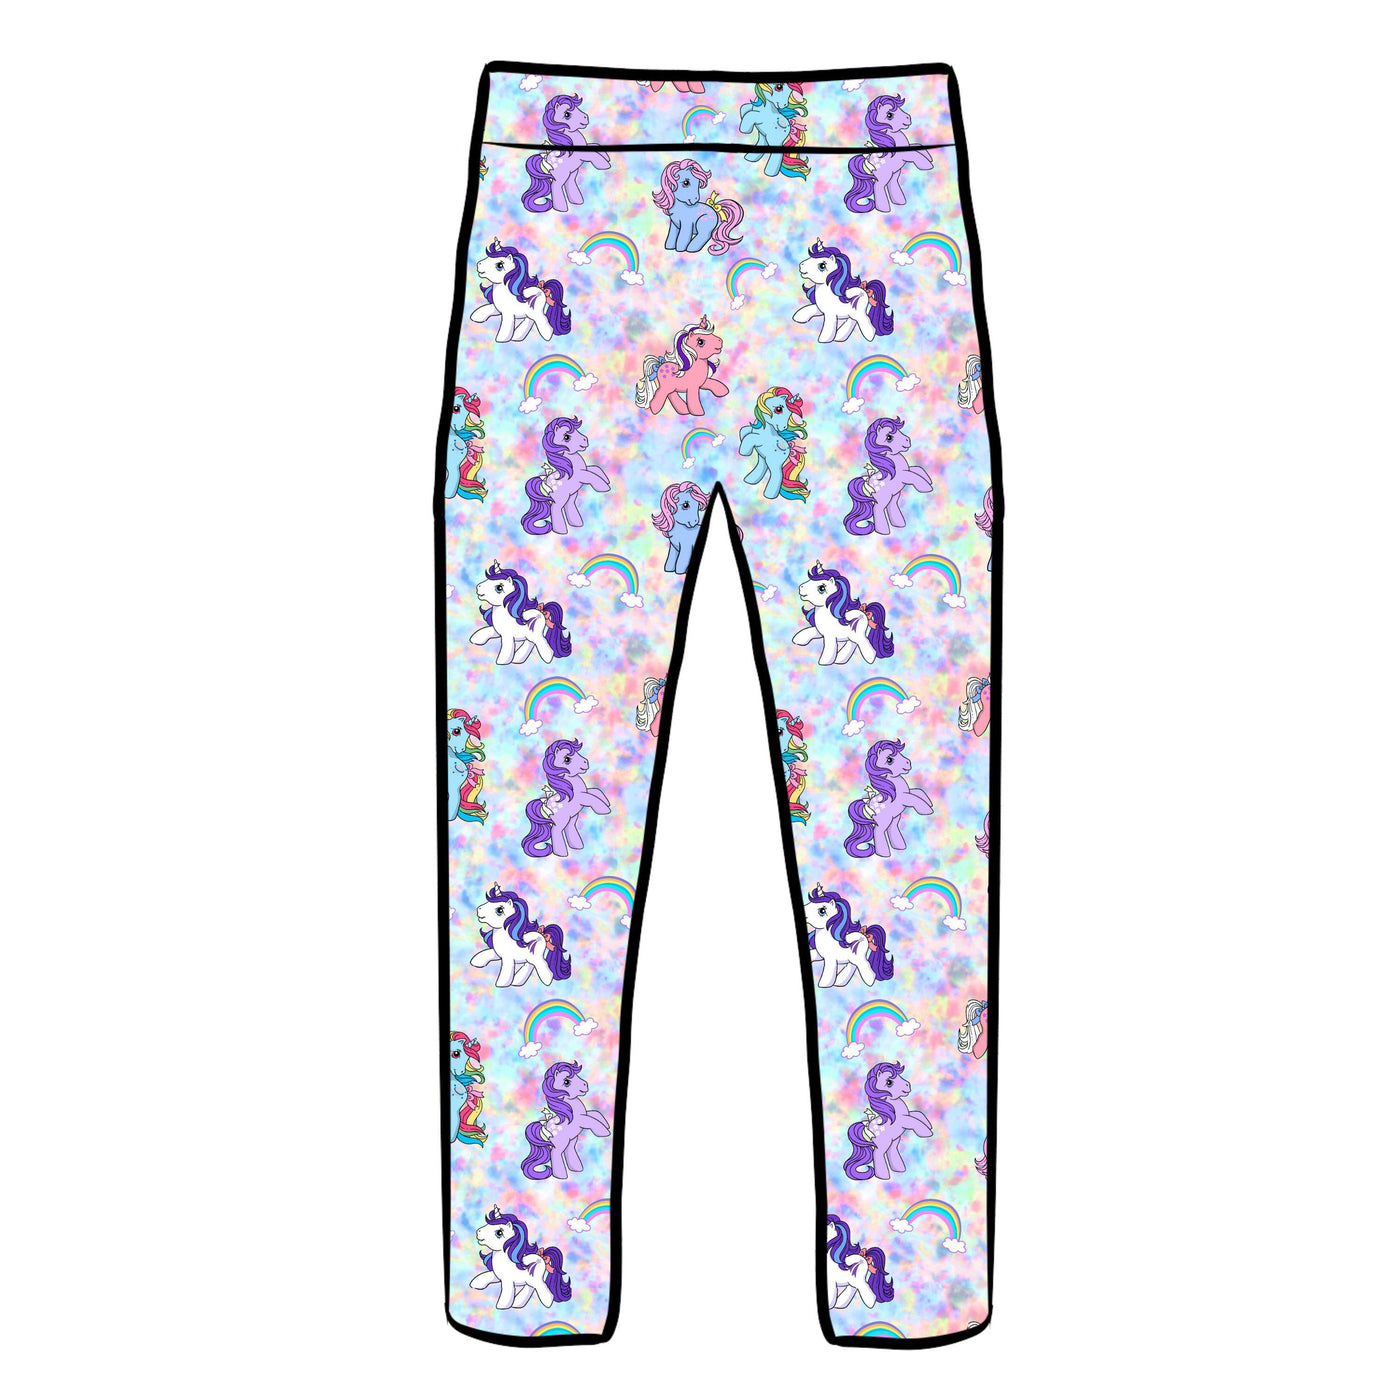 ***PRE-ORDER FOR DELIVERY 2ND WEEK MARCH*** Tie Dye Ponies Super Soft Leggings